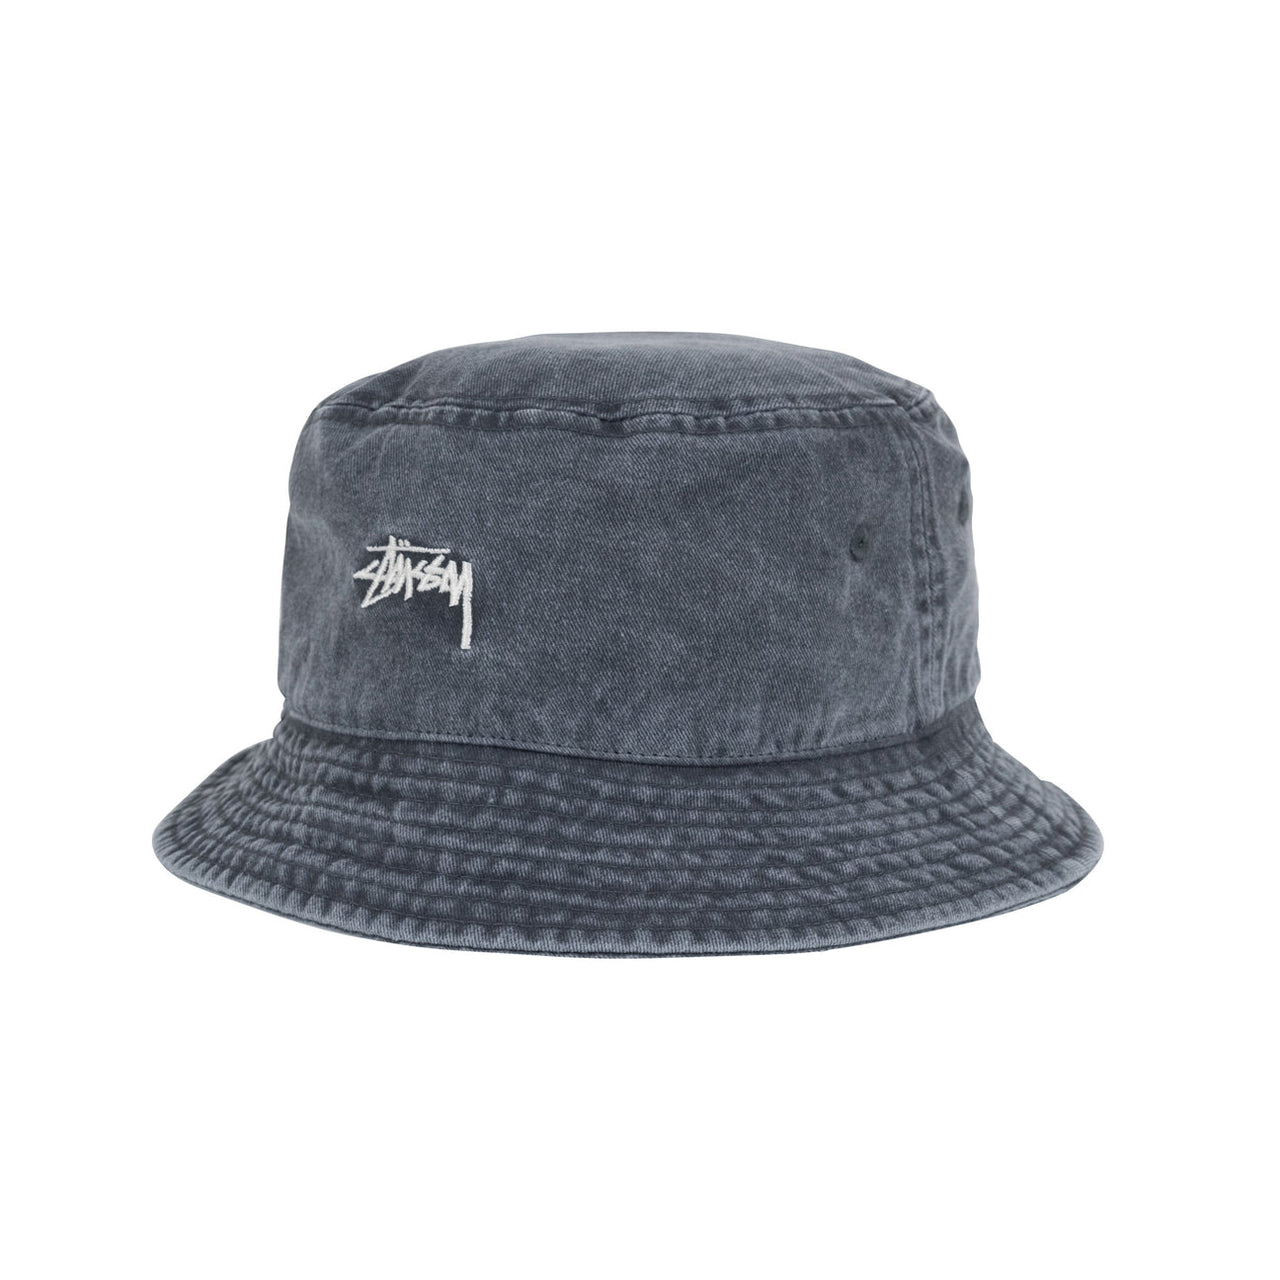 Washed Stock Bucket Hat Charcoal